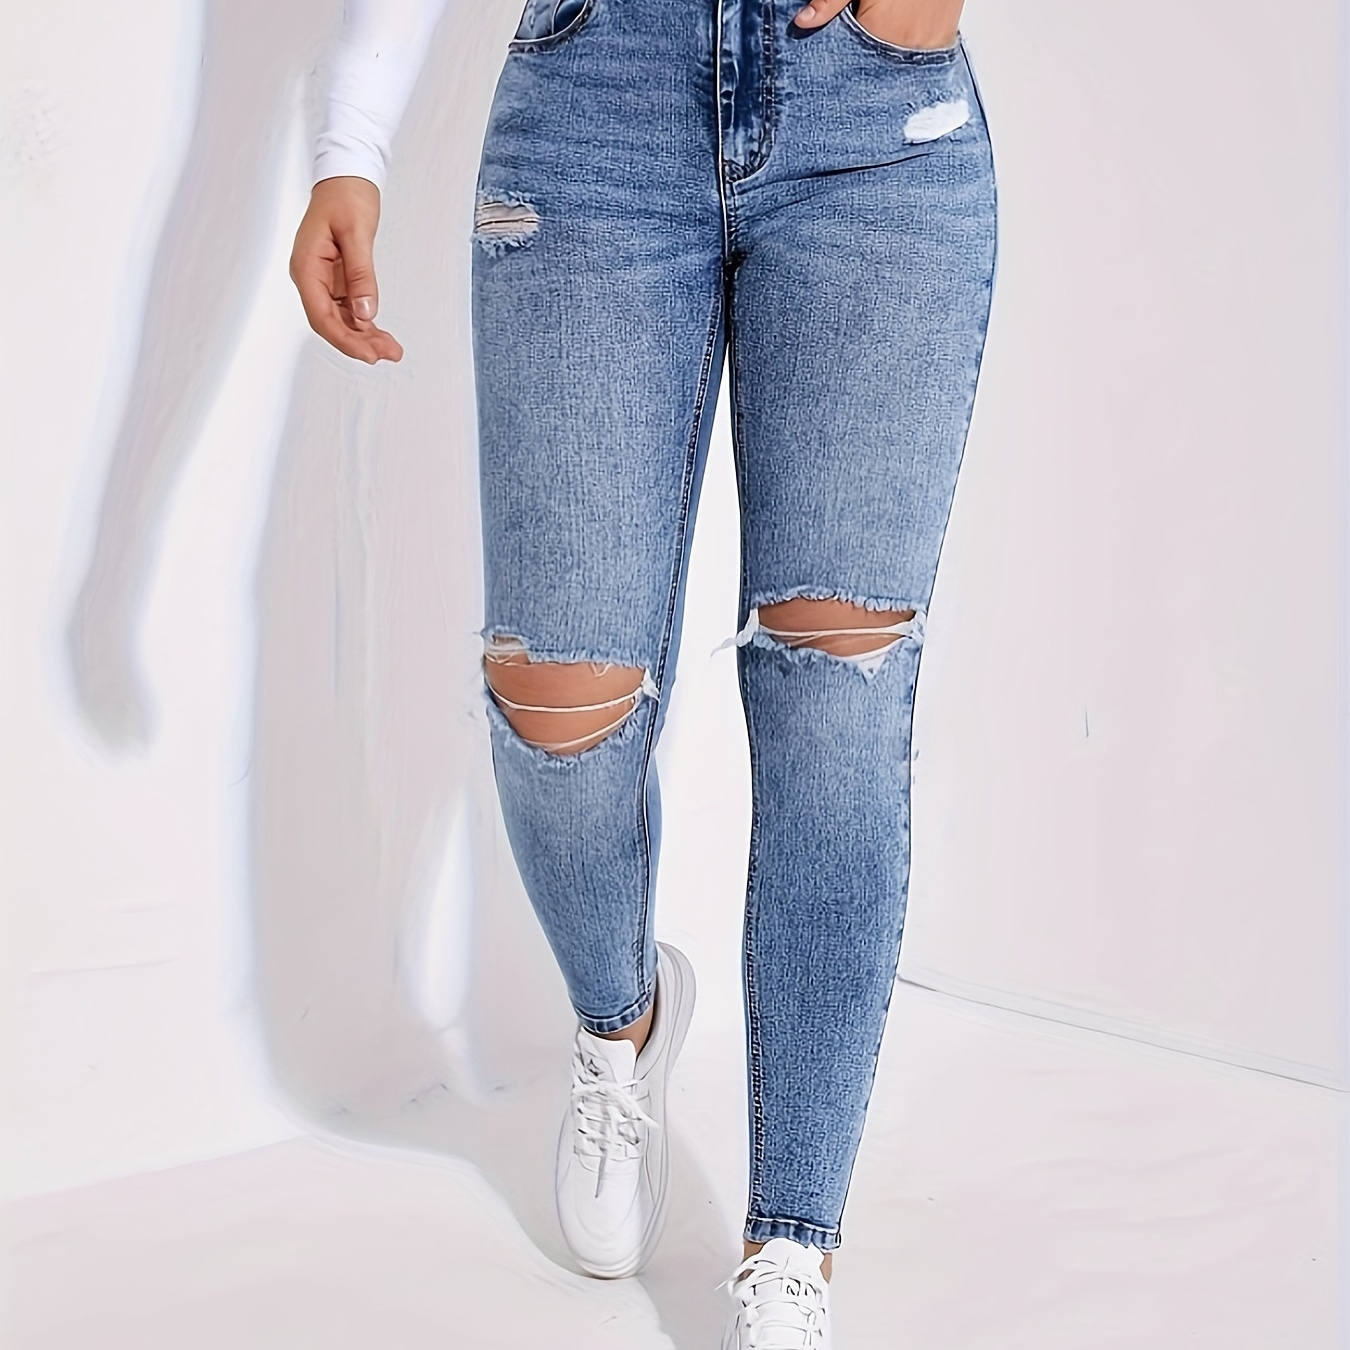 

Ripped Skinny Fit Jeans, Distressed Washed Blue Denim Pants, Women's Denim Jeans & Clothing